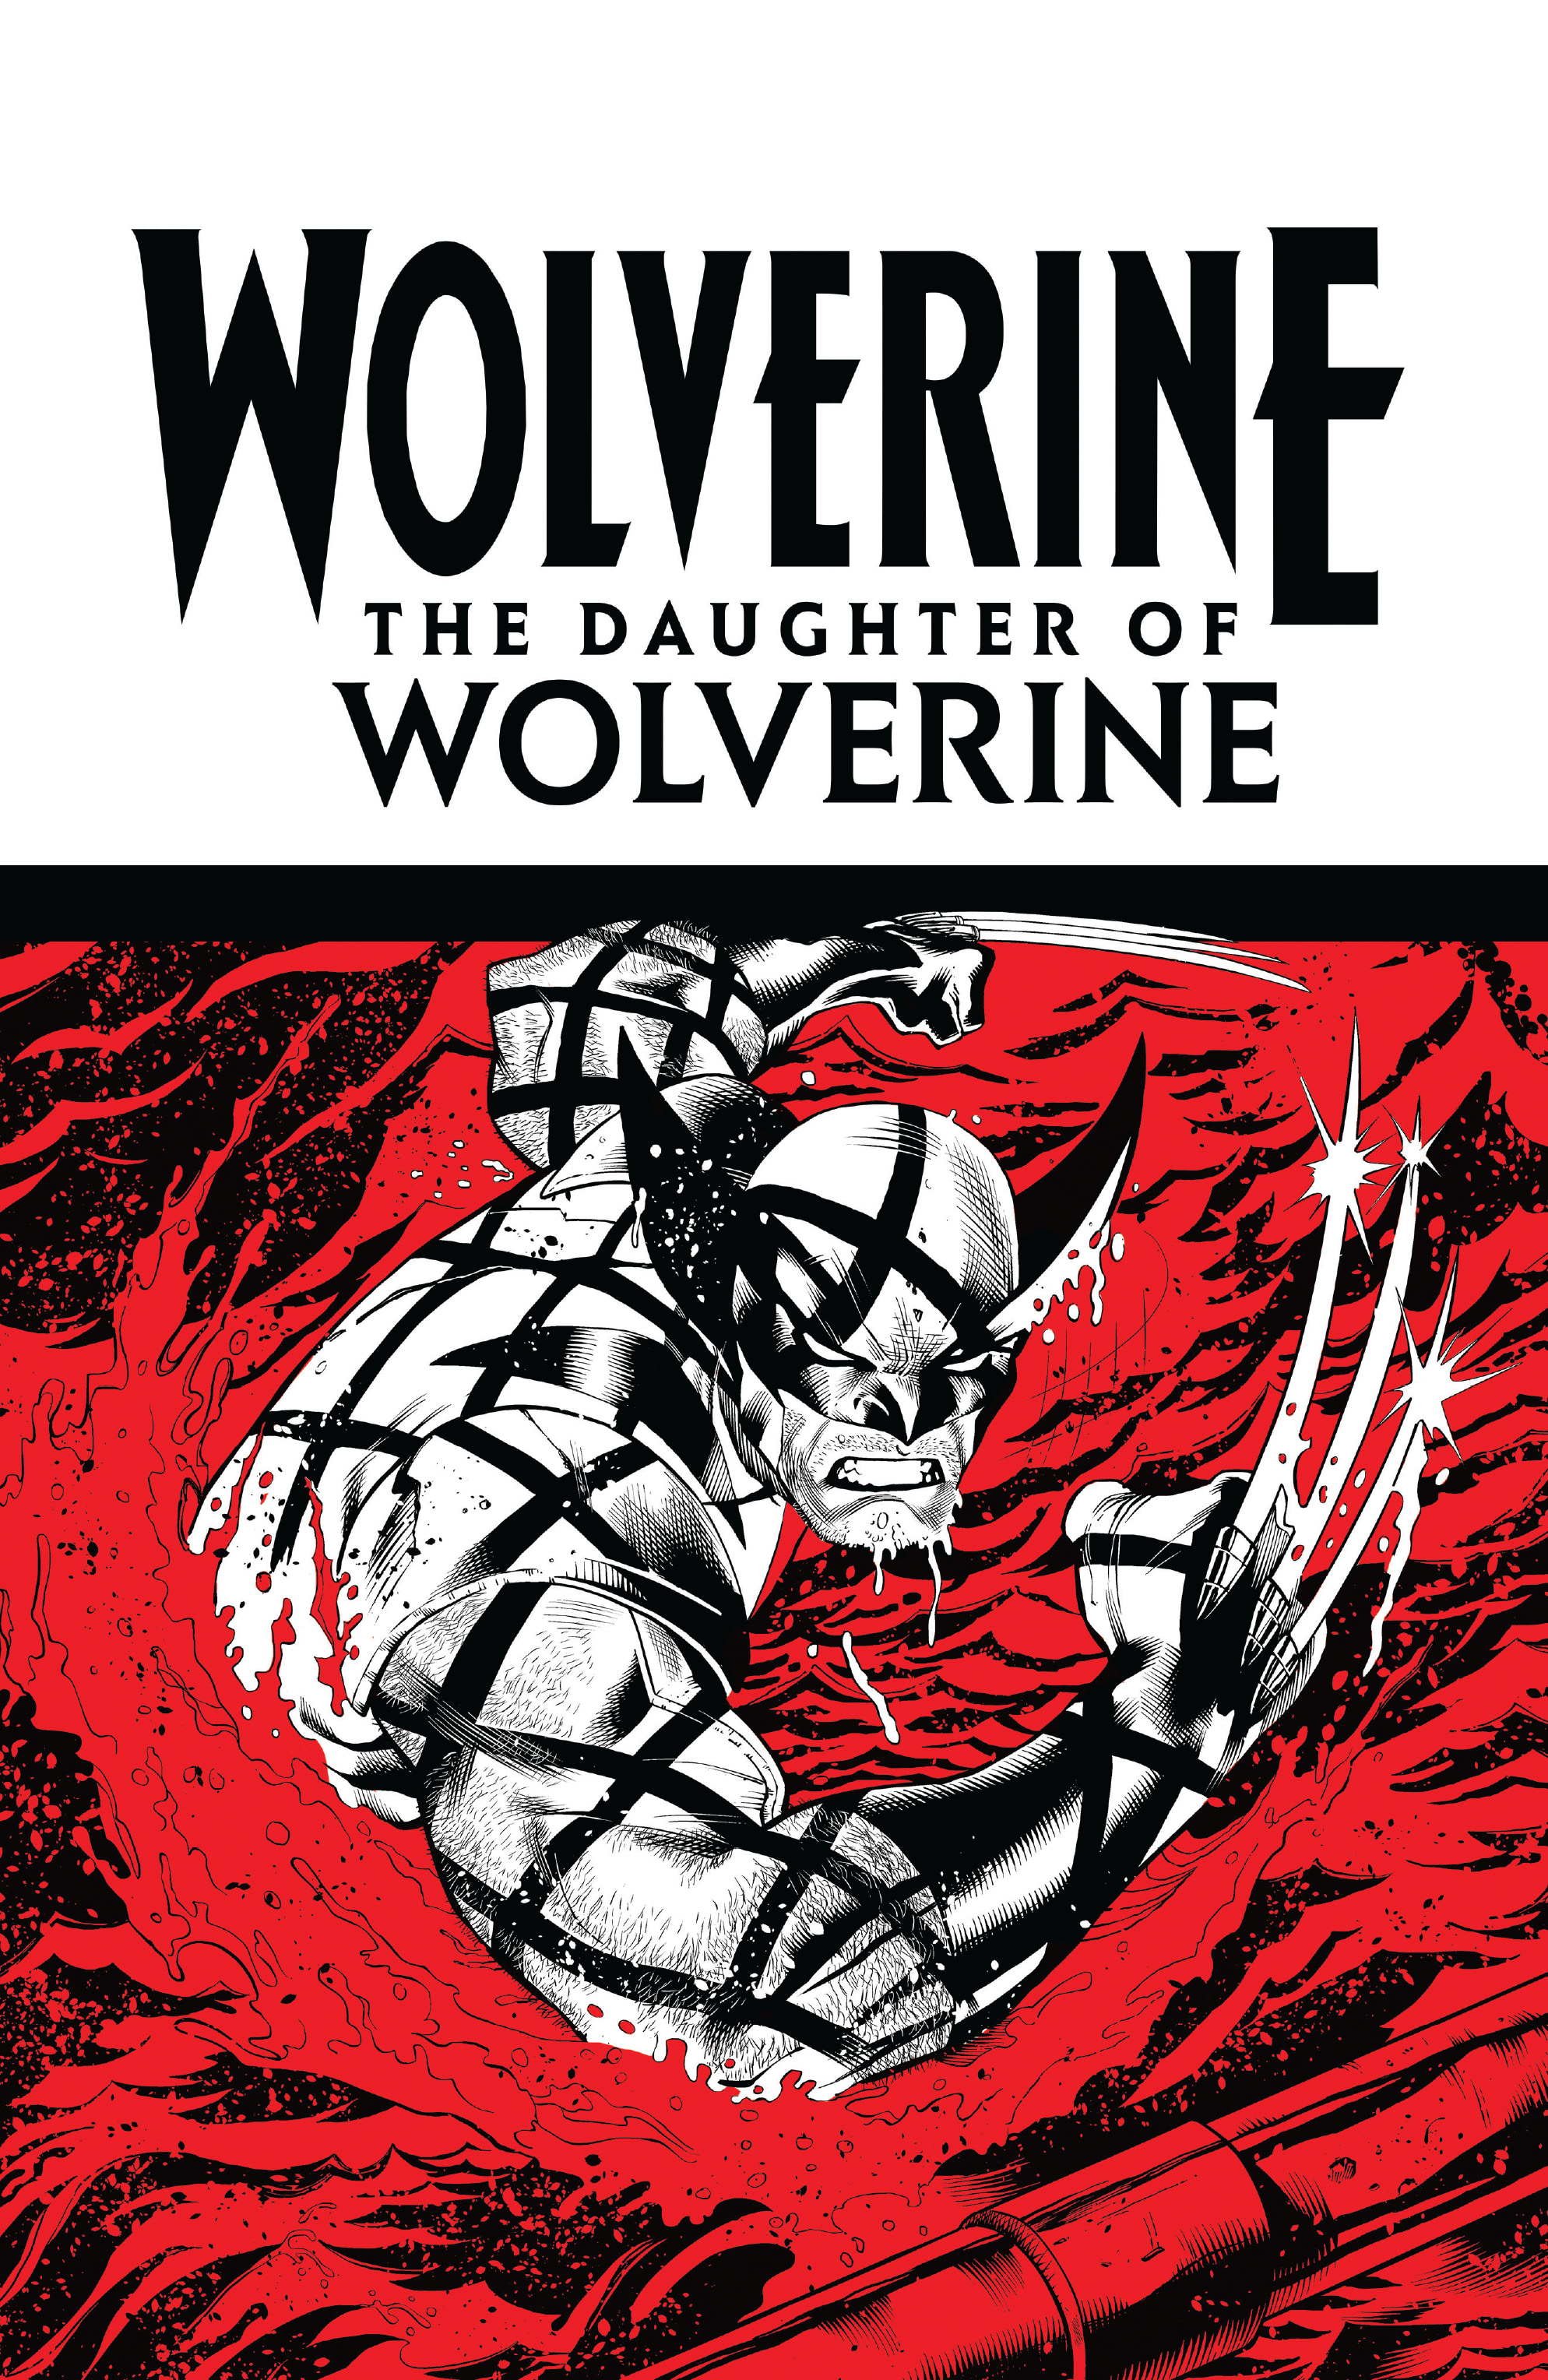 Read online Wolverine: The Daughter of Wolverine comic -  Issue # TPB - 2